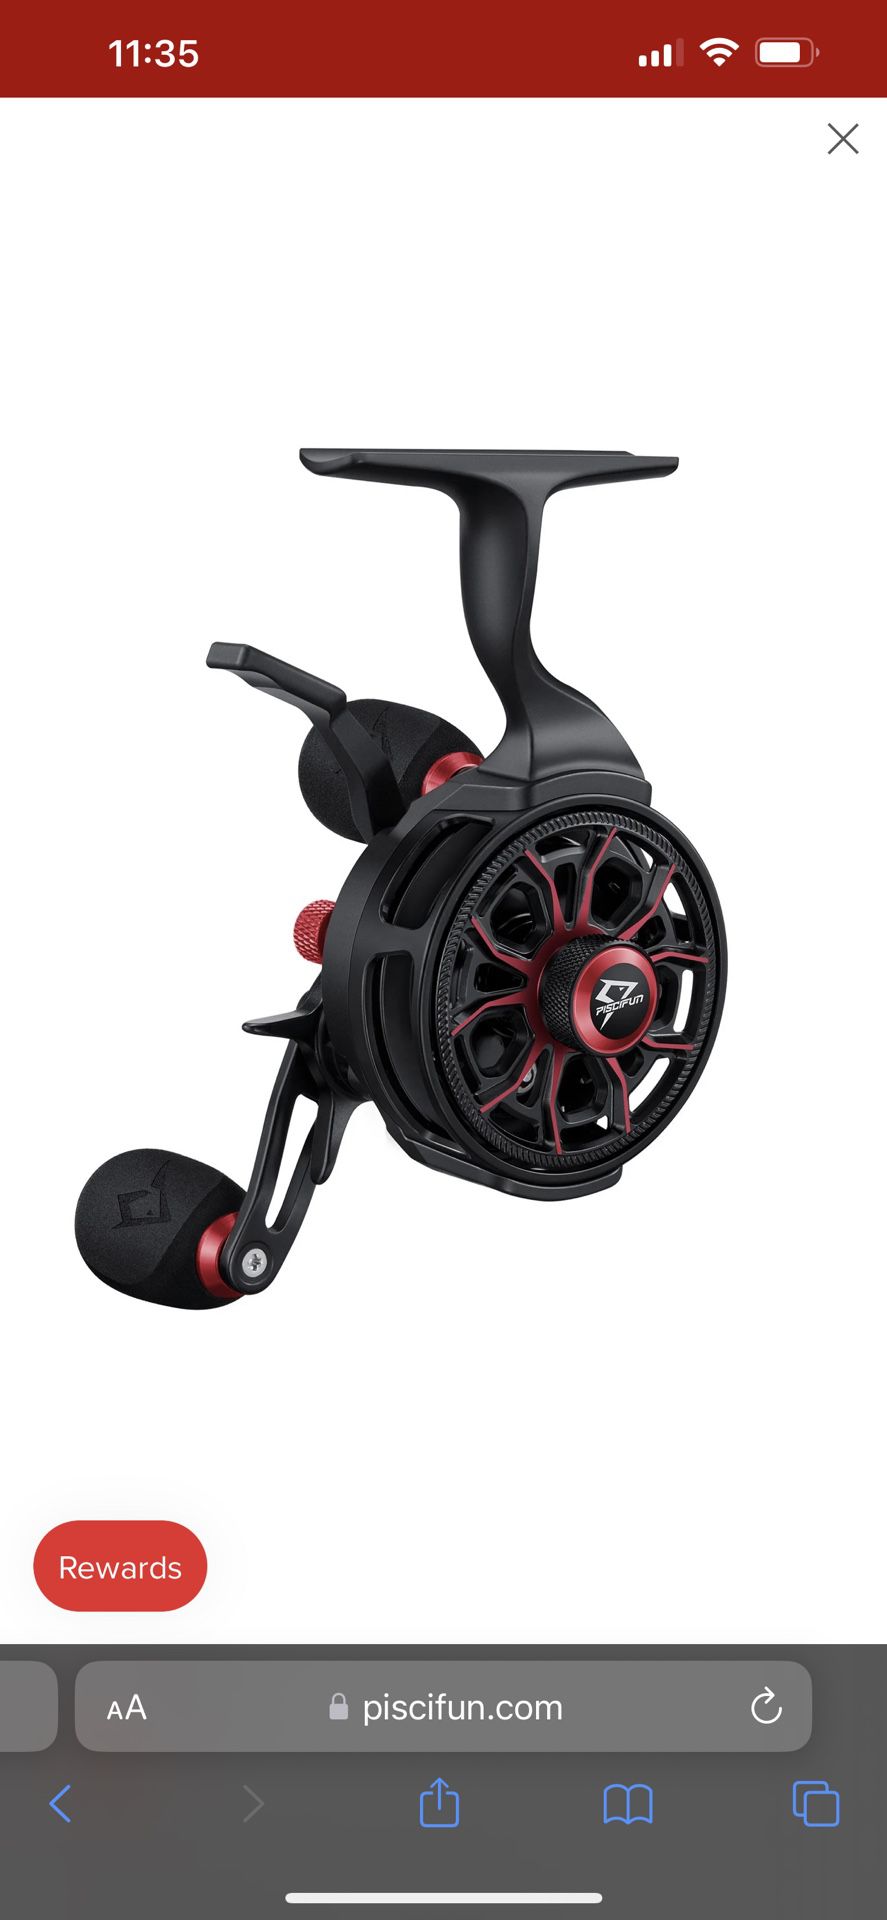 PISCIFUN ICX CARBON ICE FISHING REEL ON SALE for Sale in Miami, FL - OfferUp